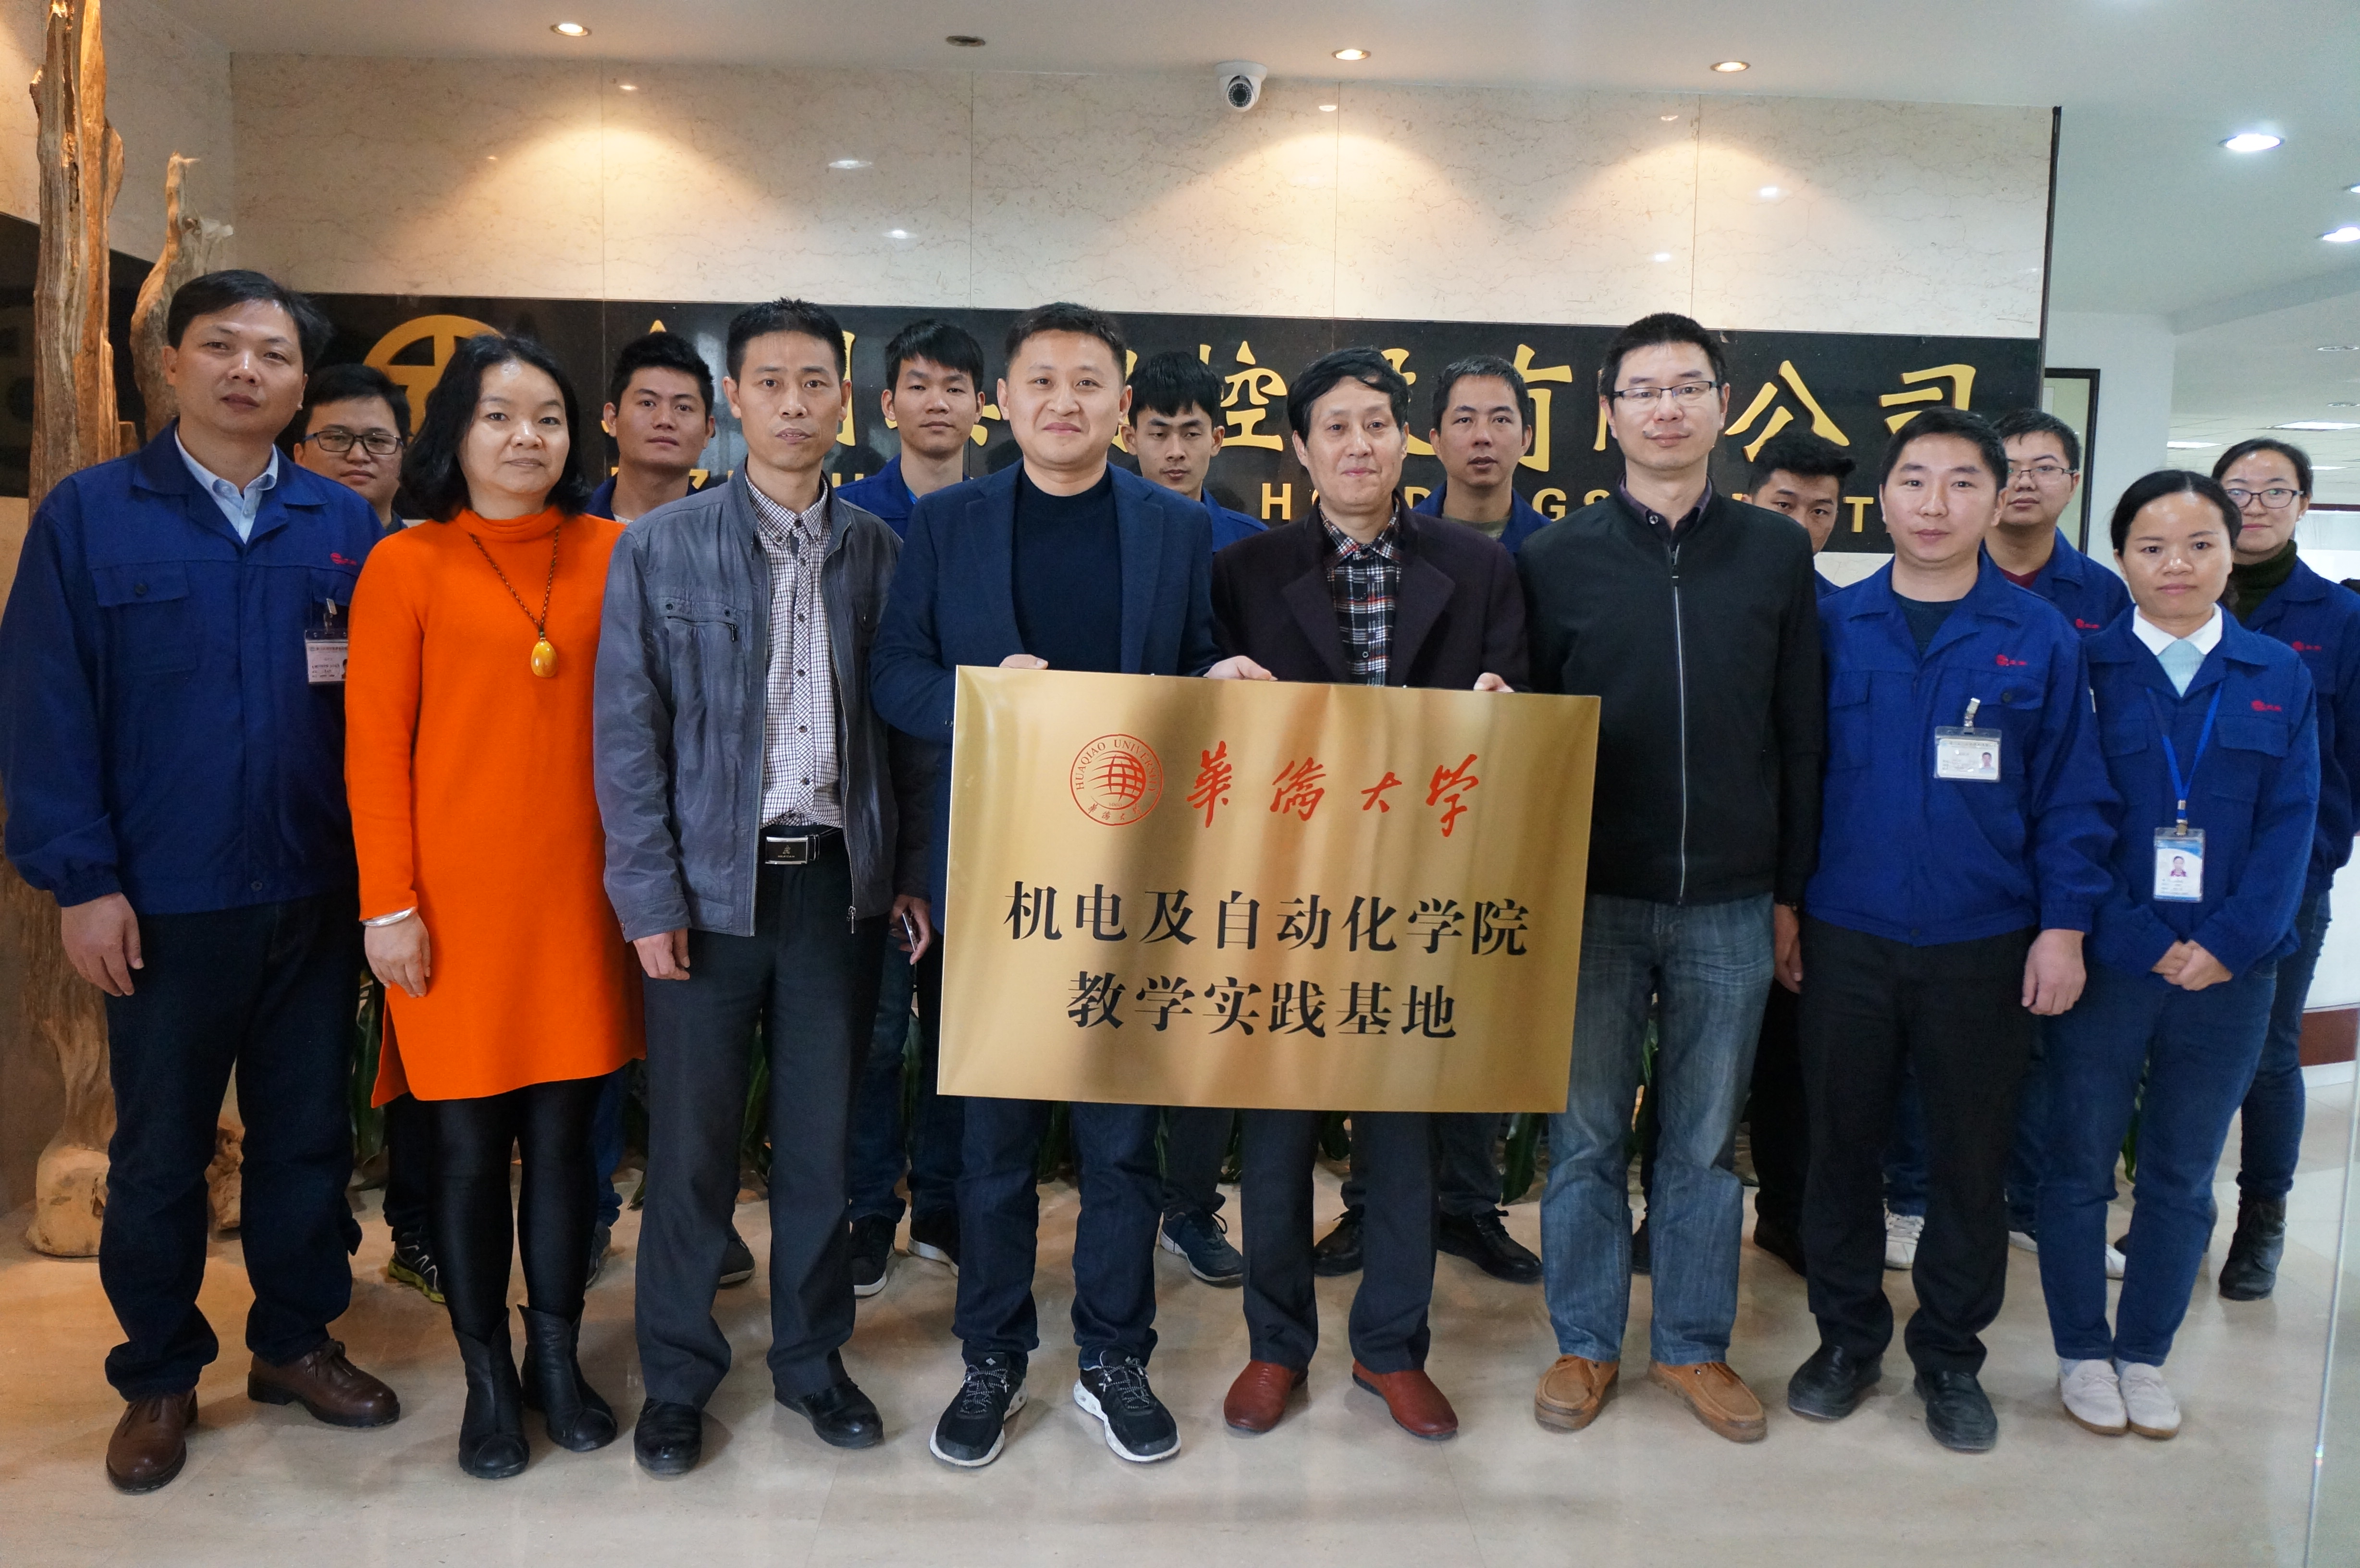 Award Ceremony of cooperation between Huaqiao University & Lizhou Group Successfully Held